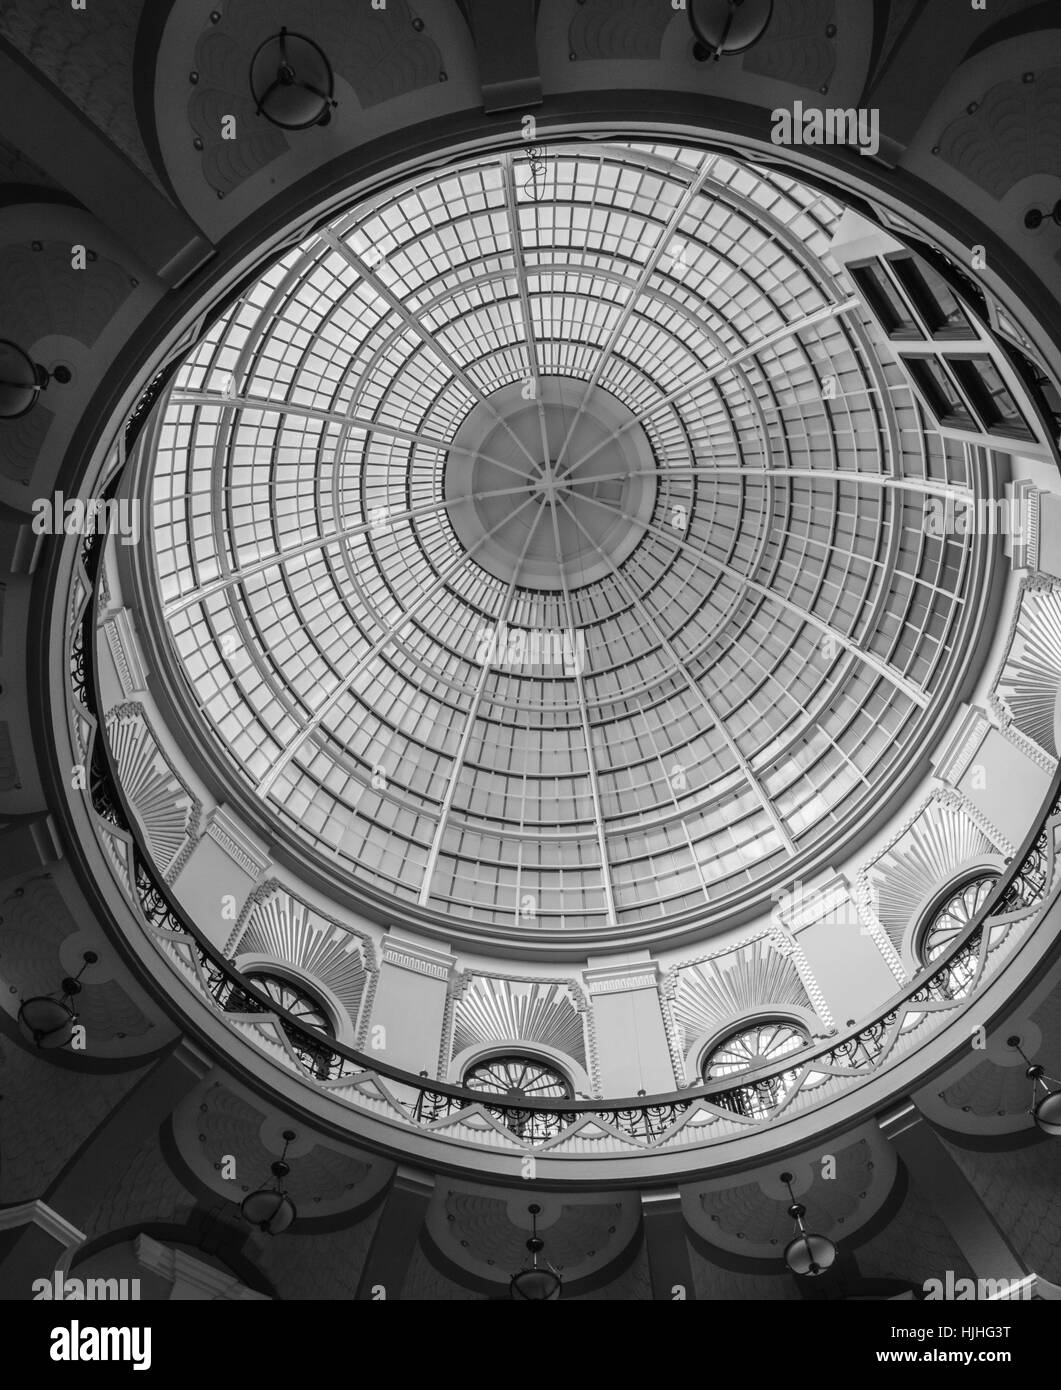 the old design of the glob window dome at the Winter gardens roof  Blackpool, Ray Boswell Stock Photo